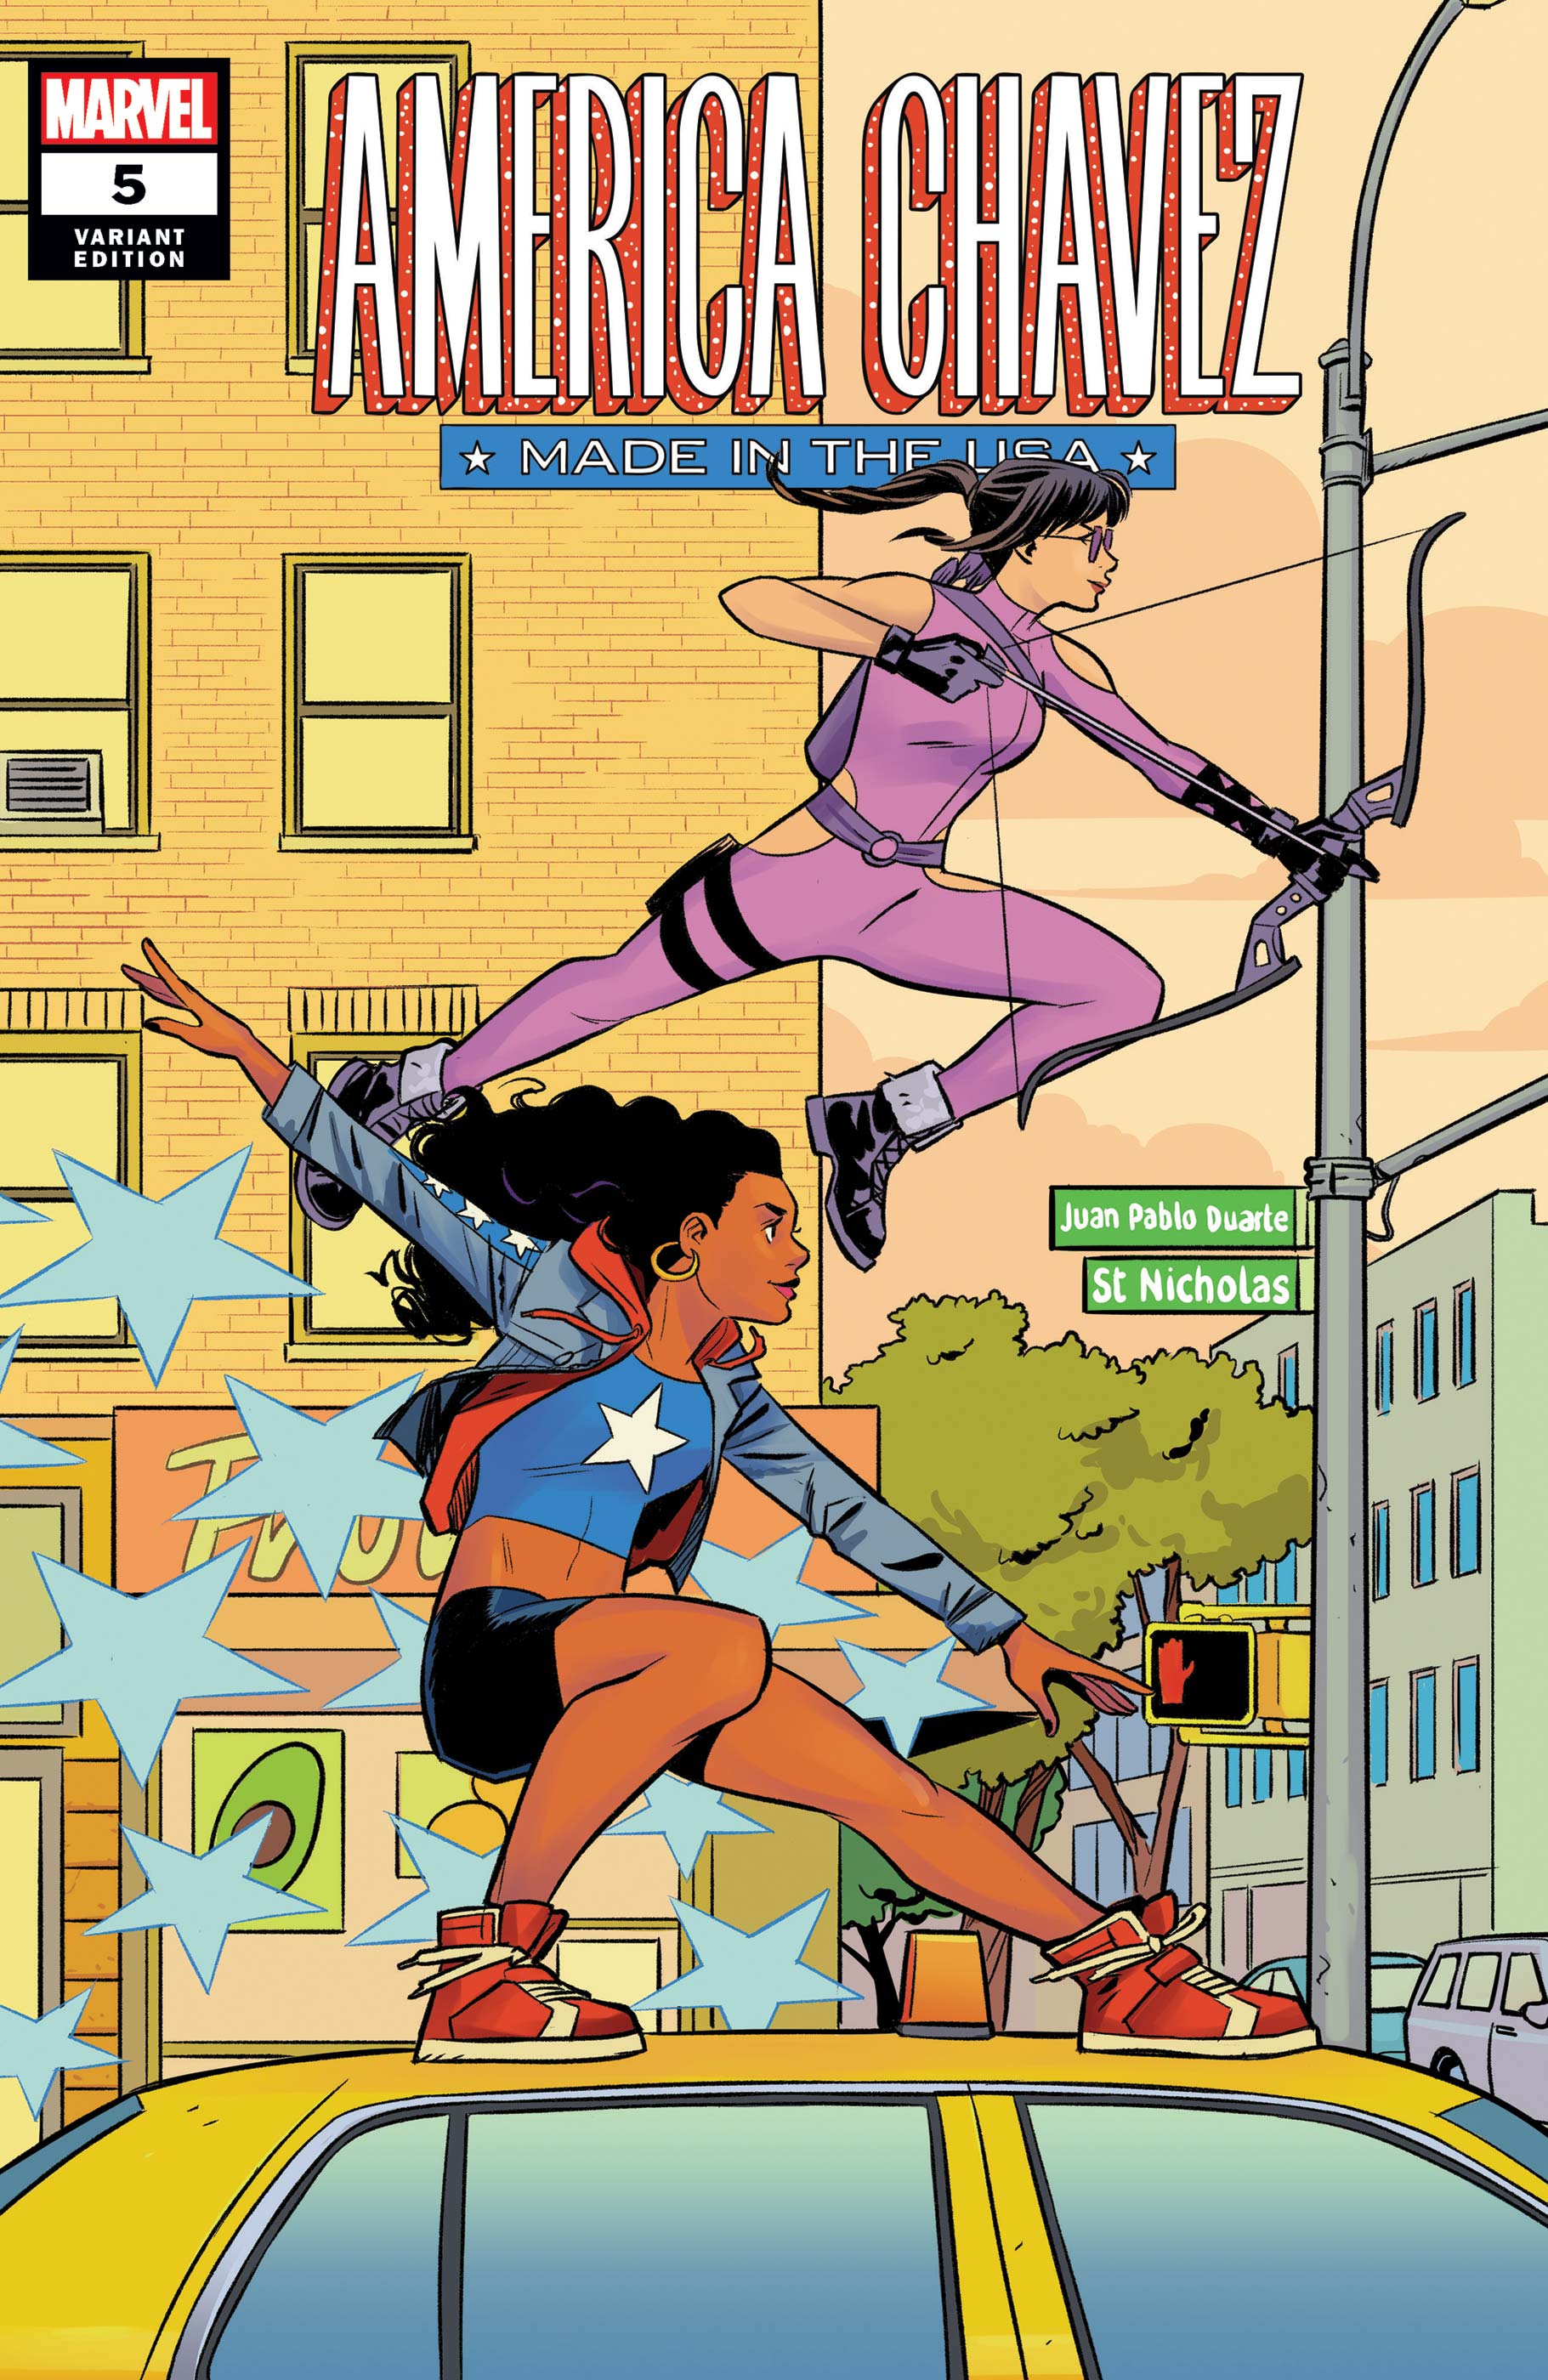 America Chavez: Made in the USA (2021) #5 (Variant)